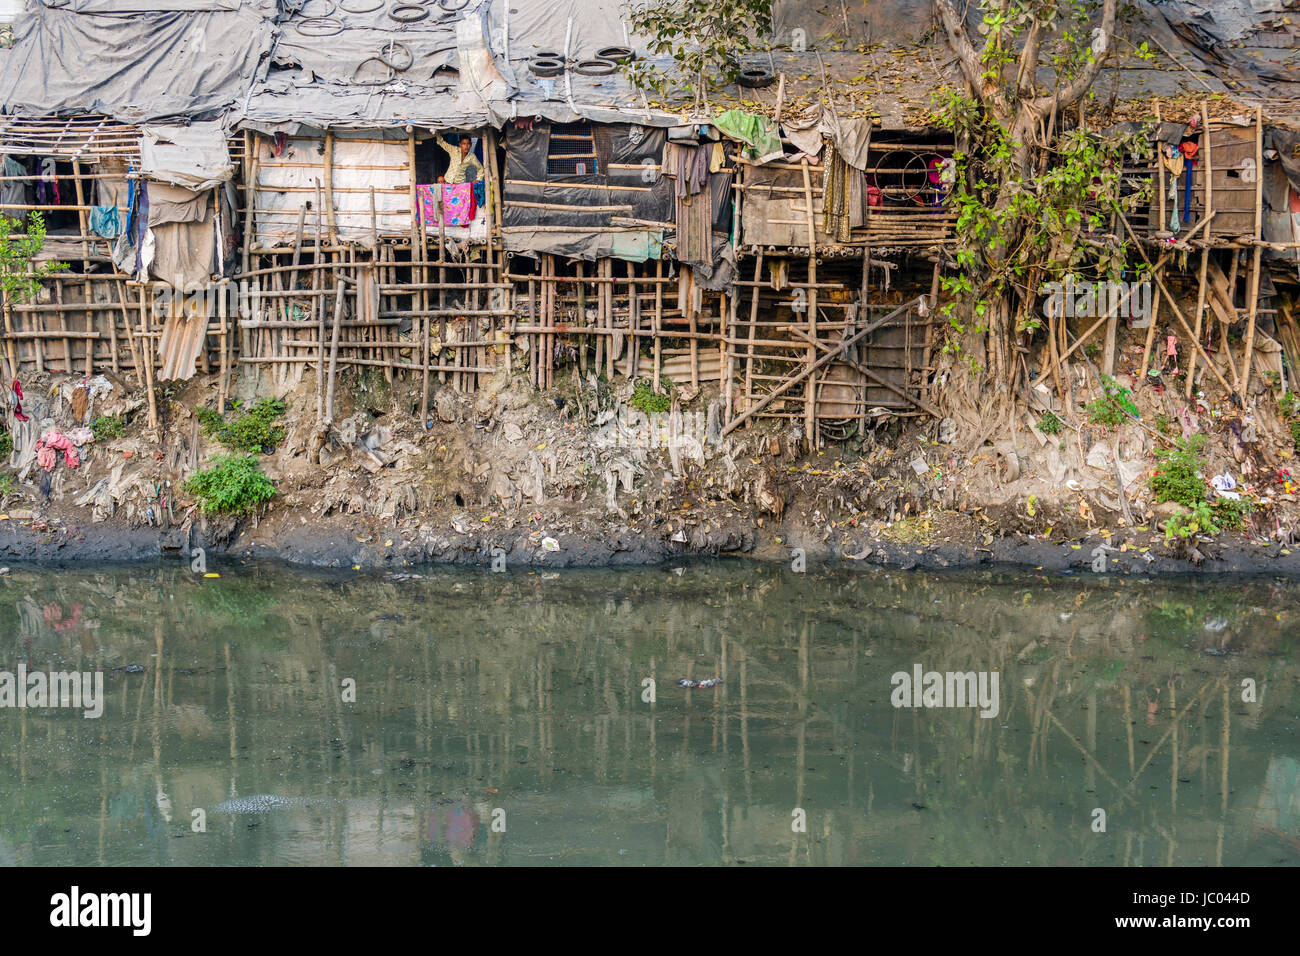 The dwellings and huts in Topsia slum are located at a dirty river Stock Photo